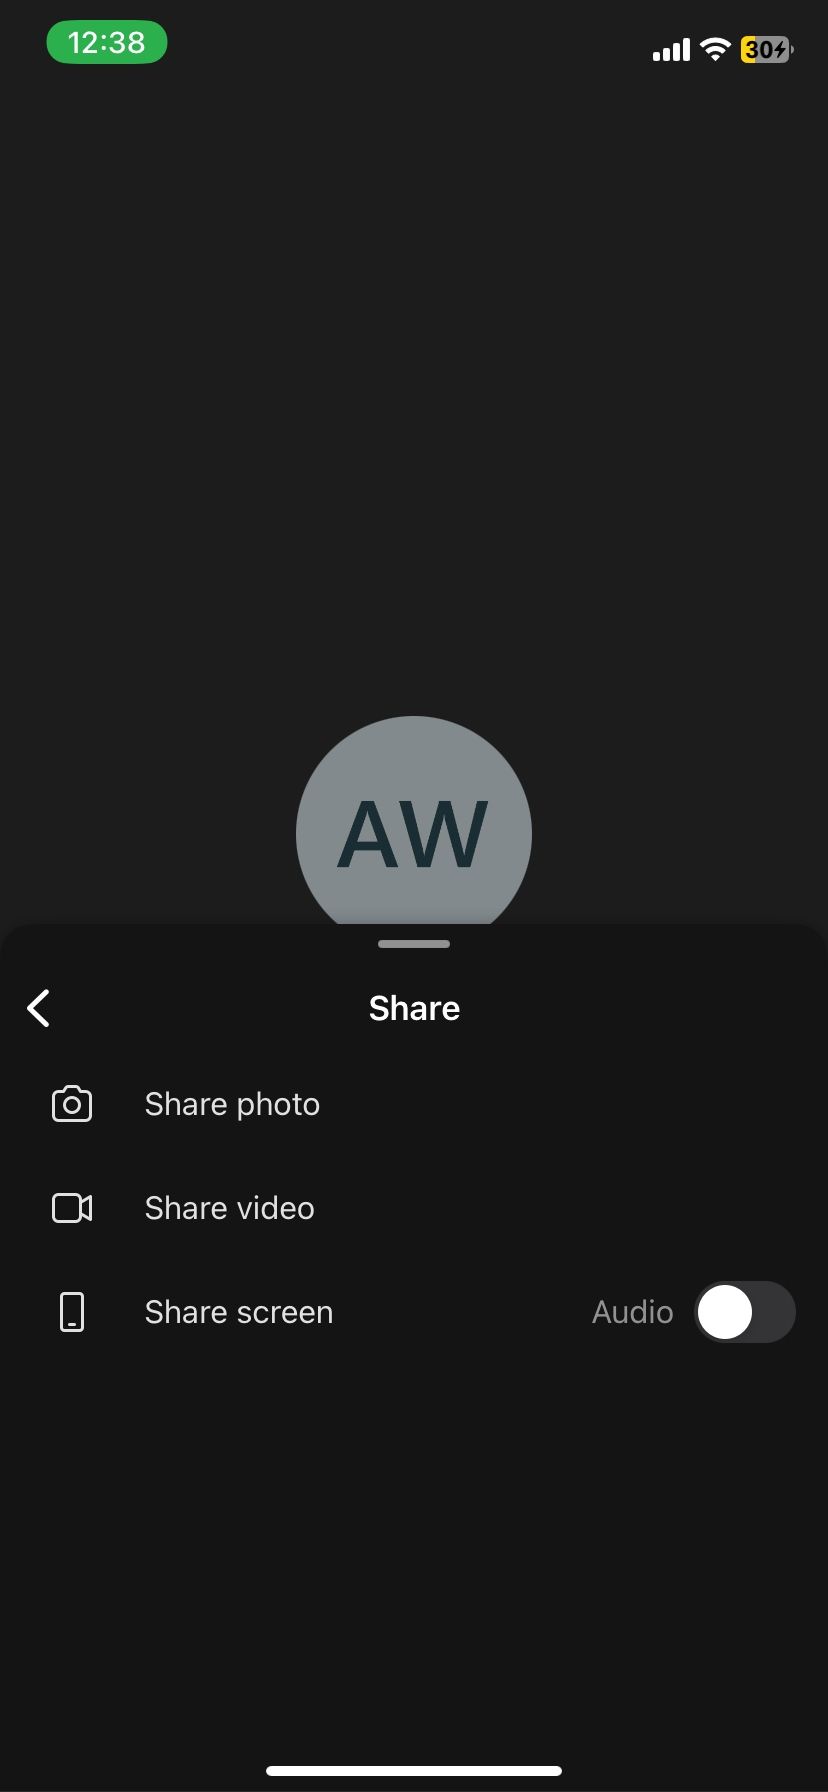 Share screen option in Microsoft Teams mobile app